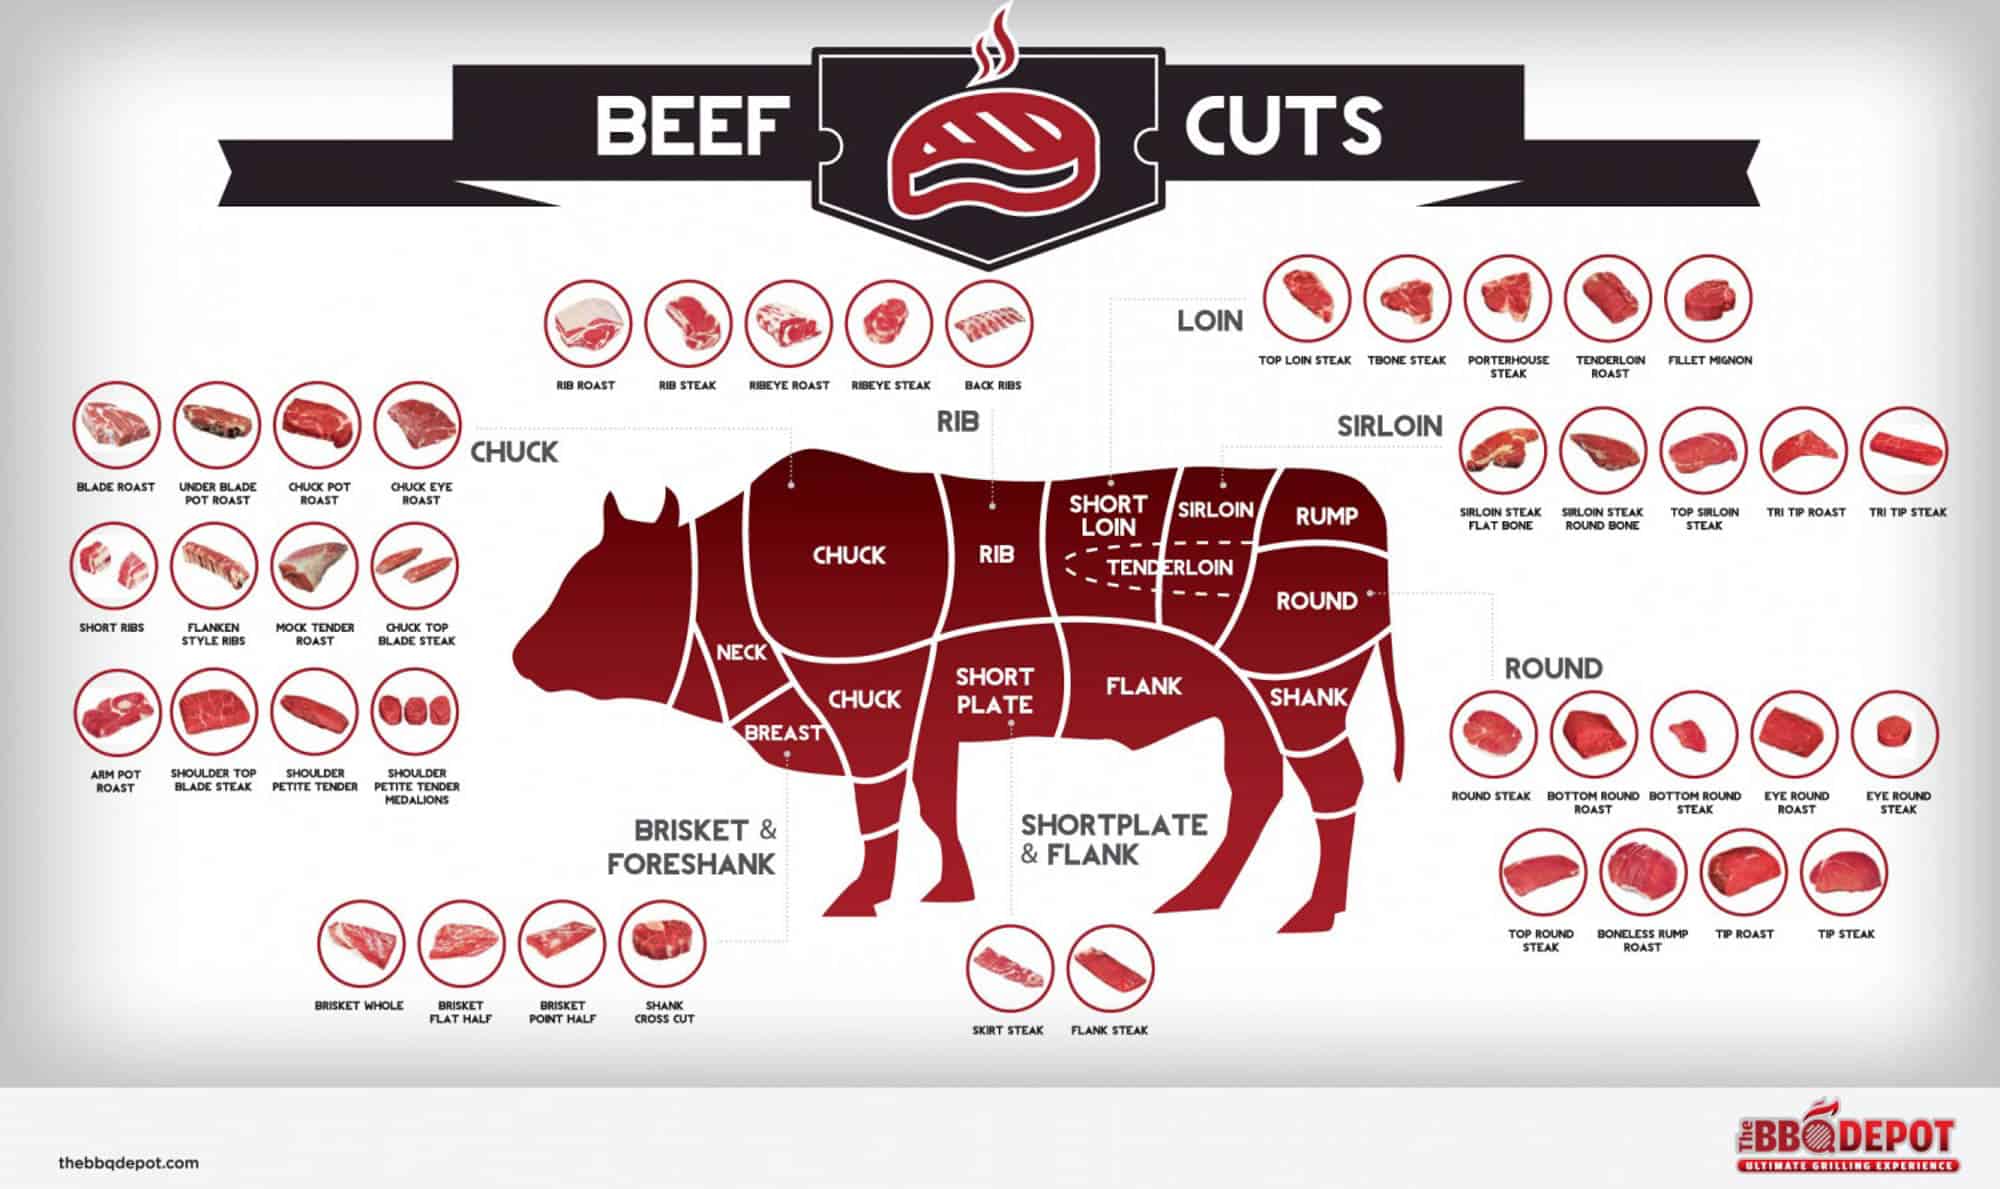 Cuts-of-Beef-Infographic.jpg